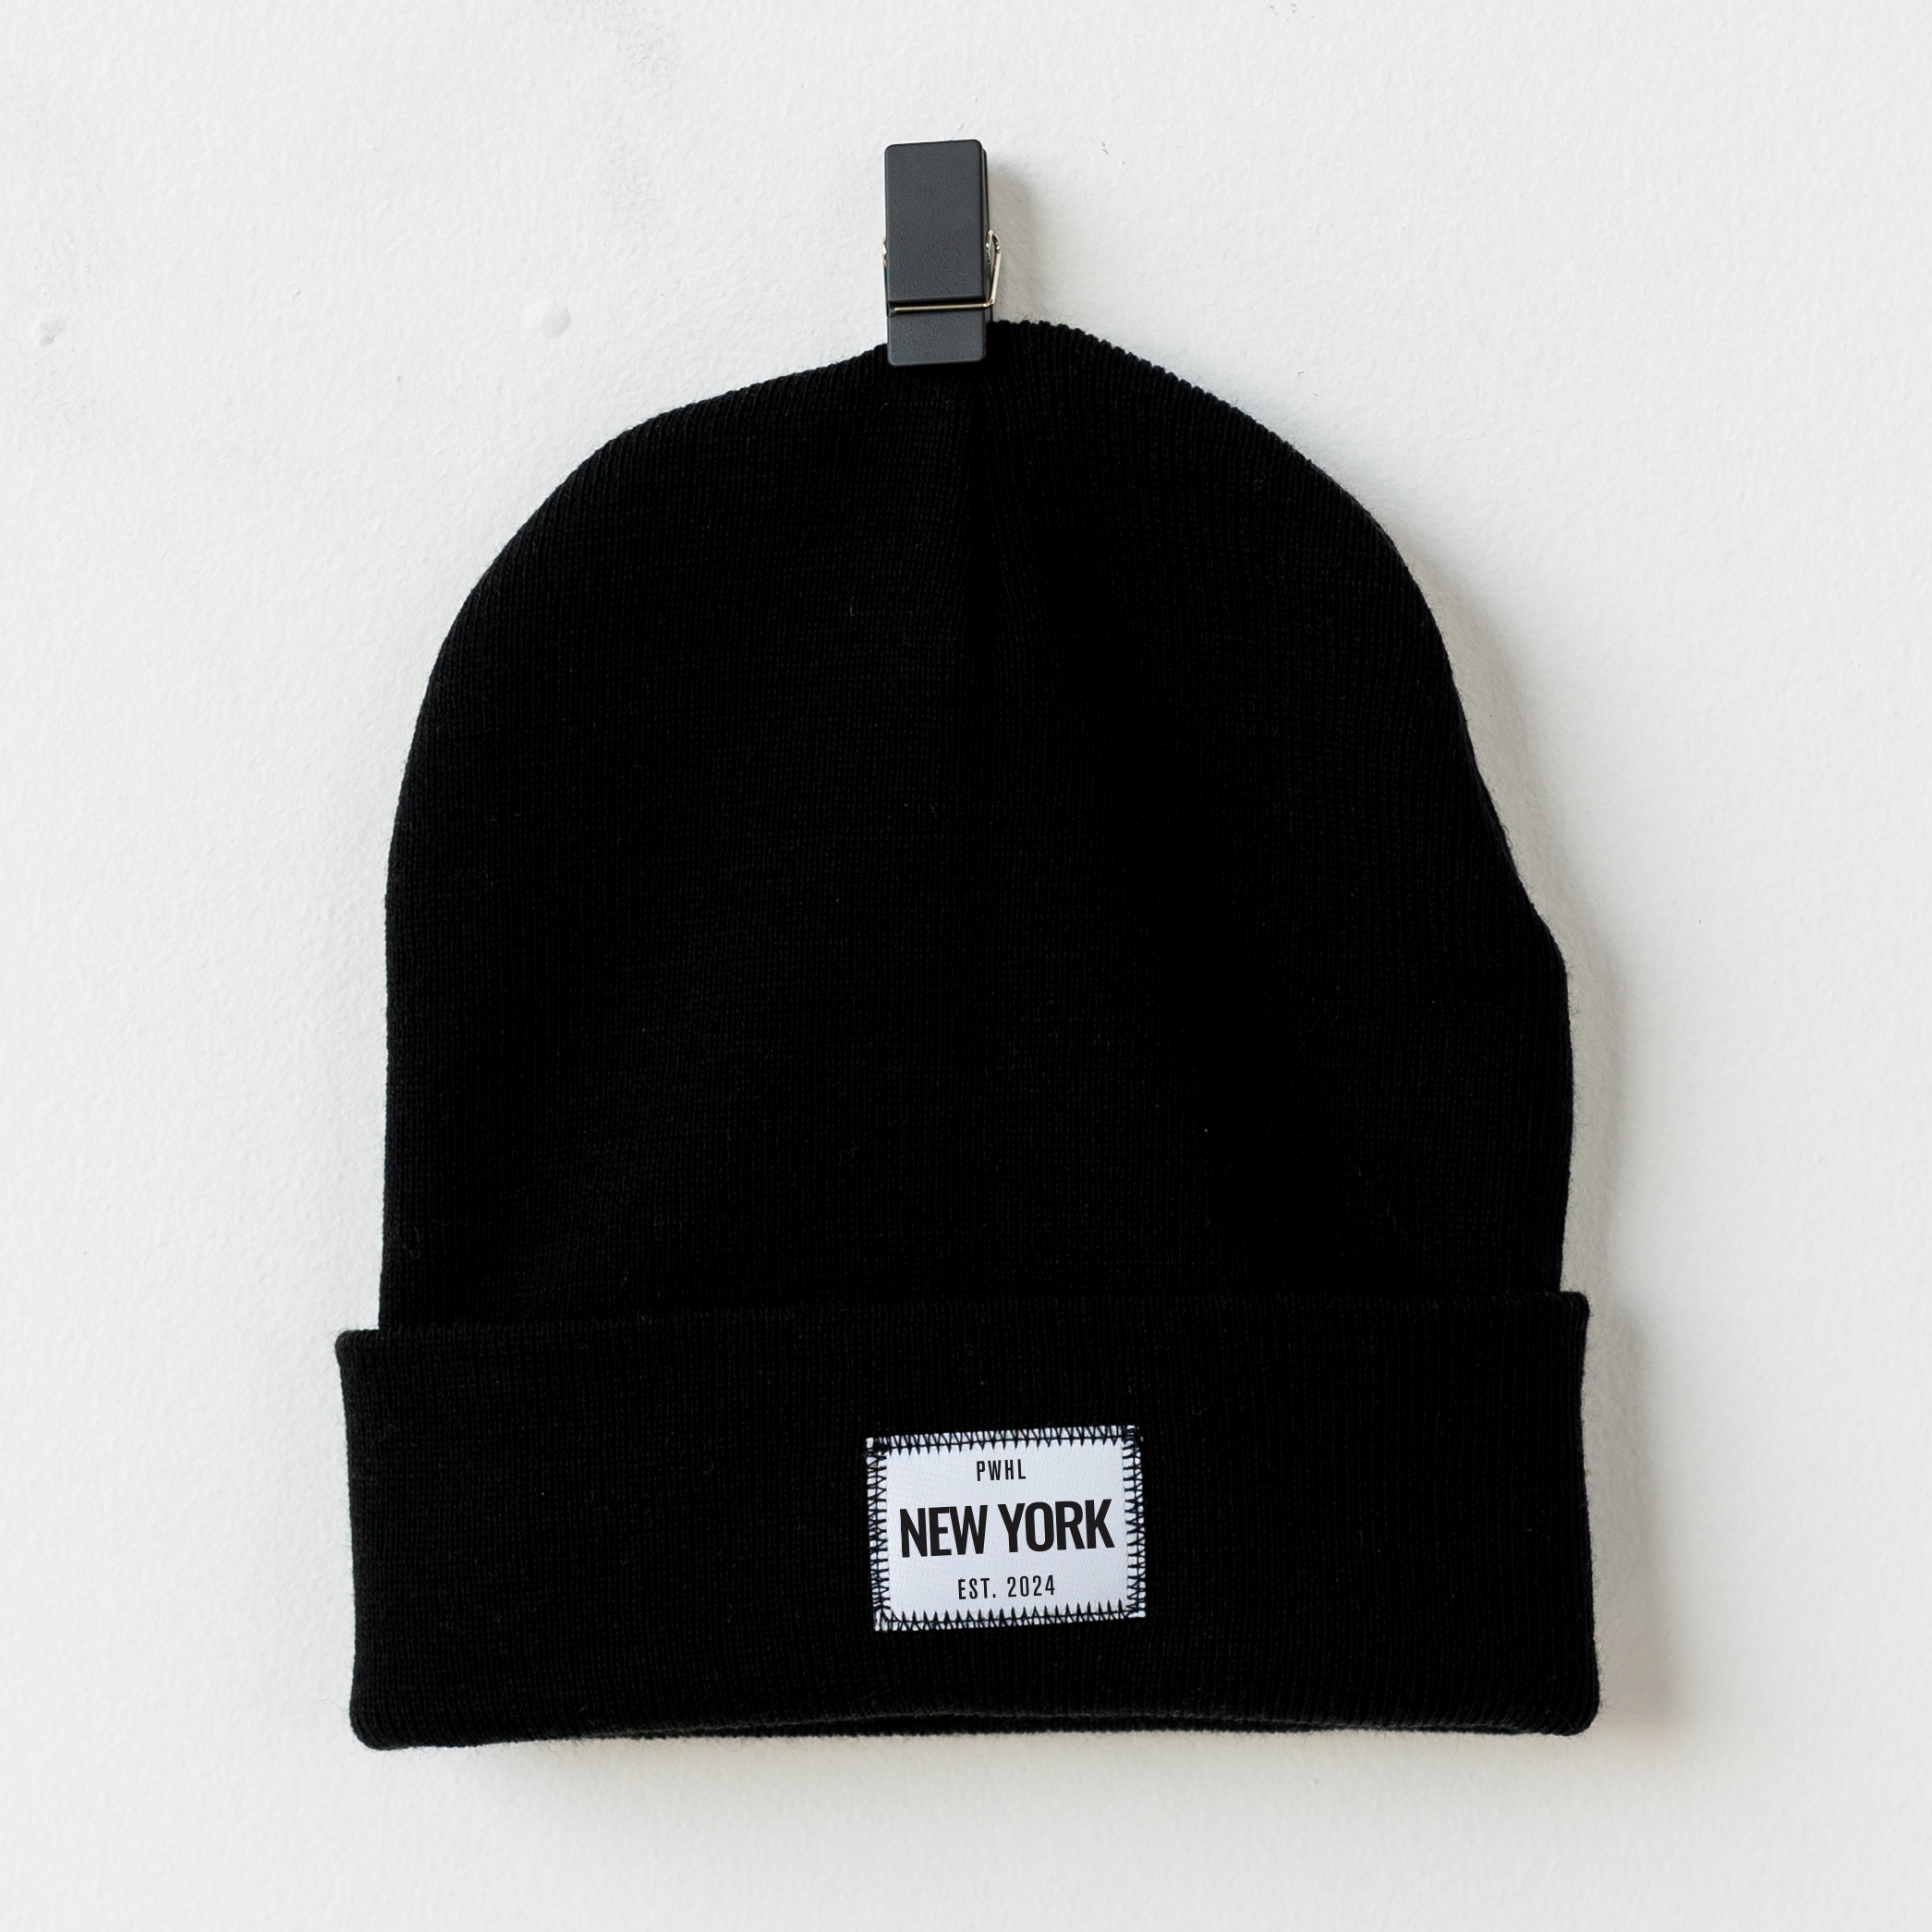 New York Toque/Beanie – The Official Shop of the PWHL